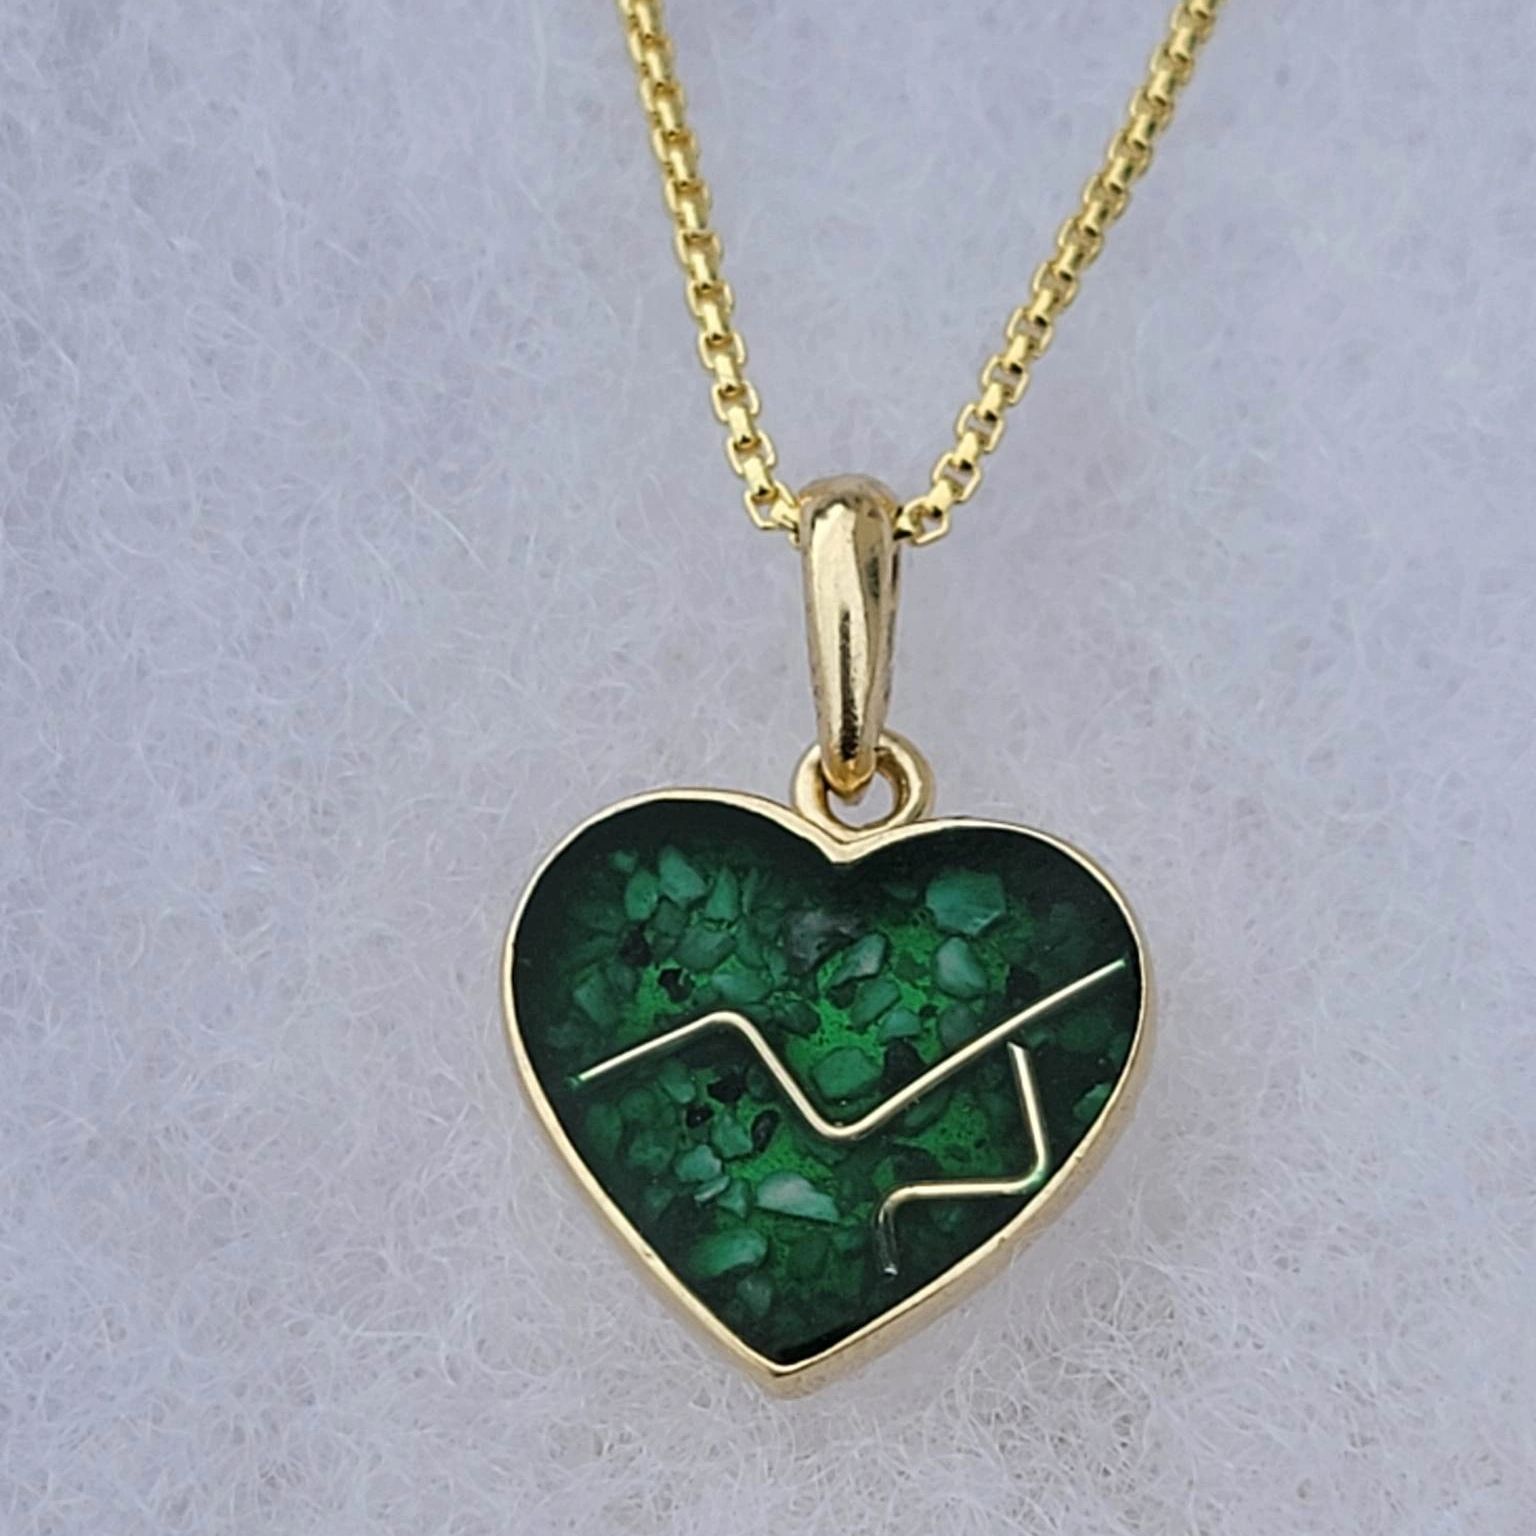 Beauty From Ashes Cremation Jewelry Kintsugi Heart